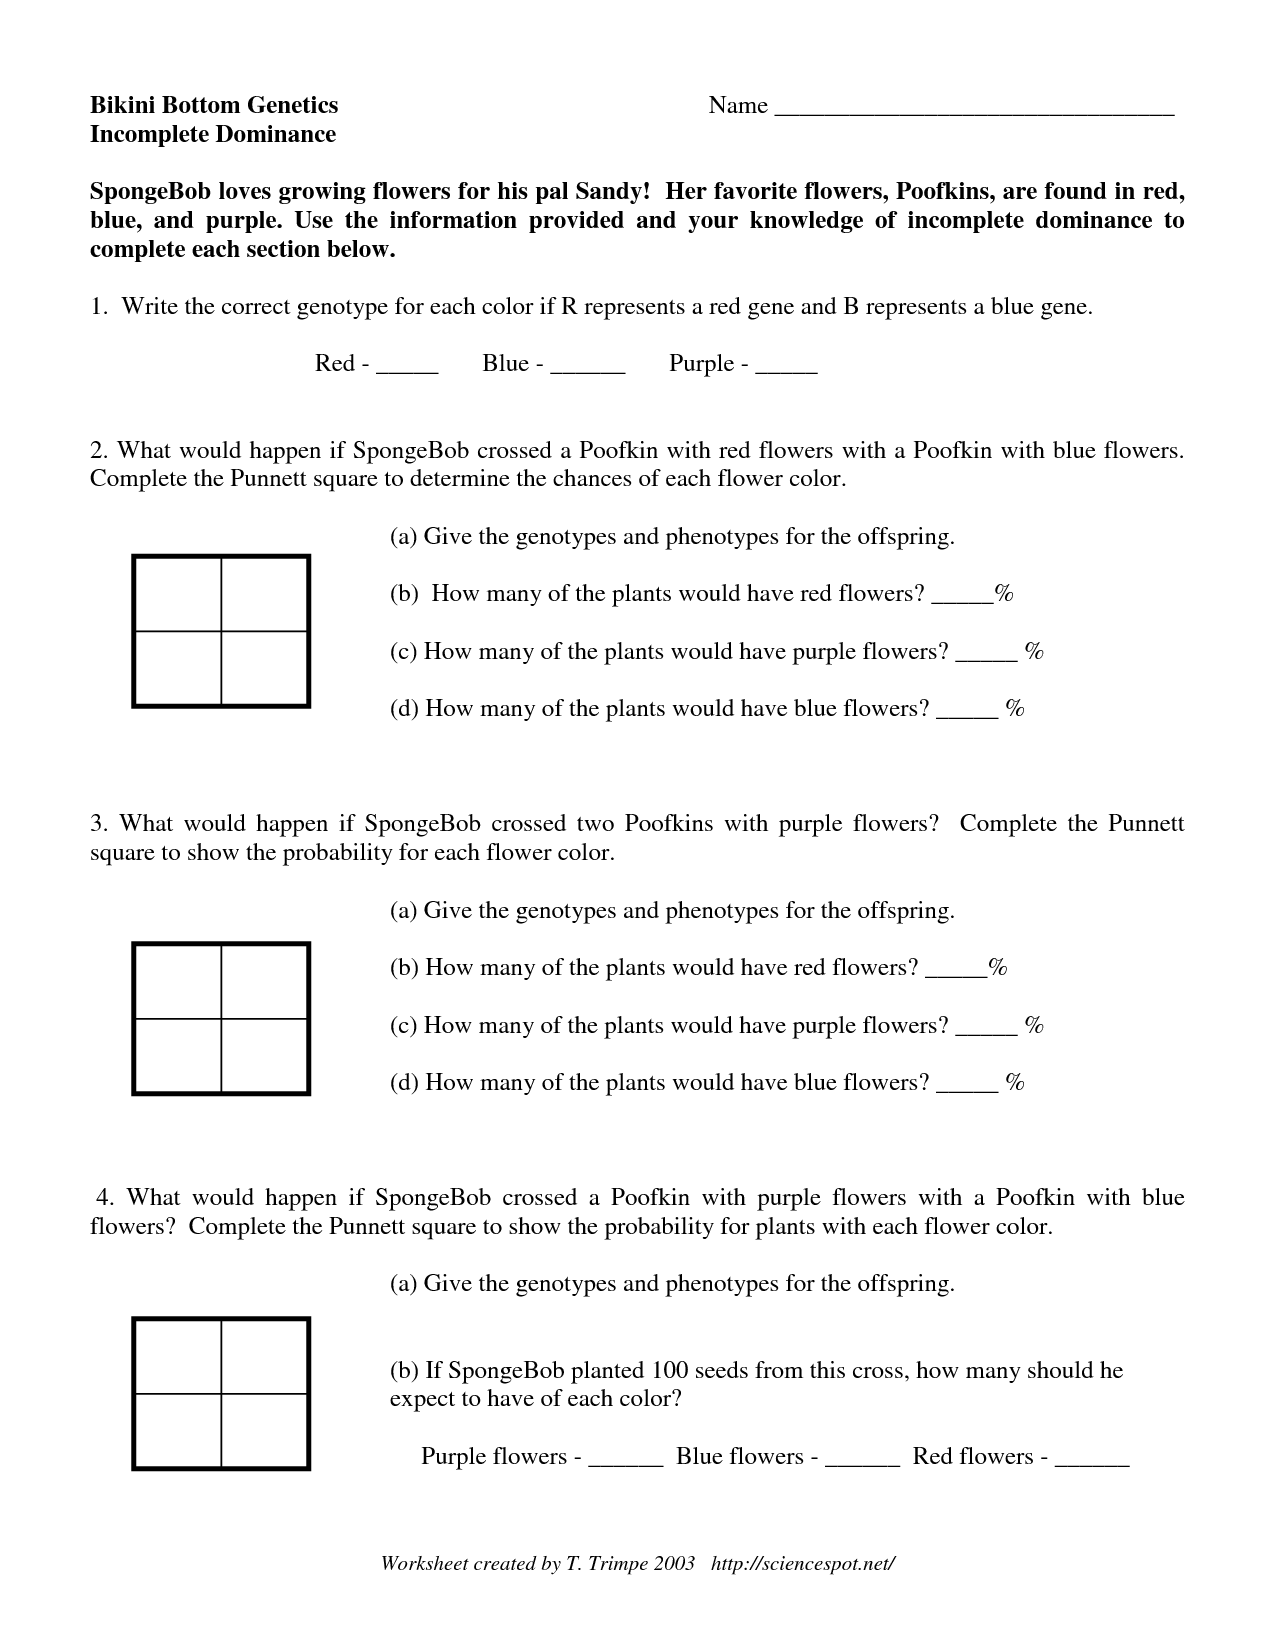 codominance-incomplete-dominance-worksheet-free-download-goodimg-co